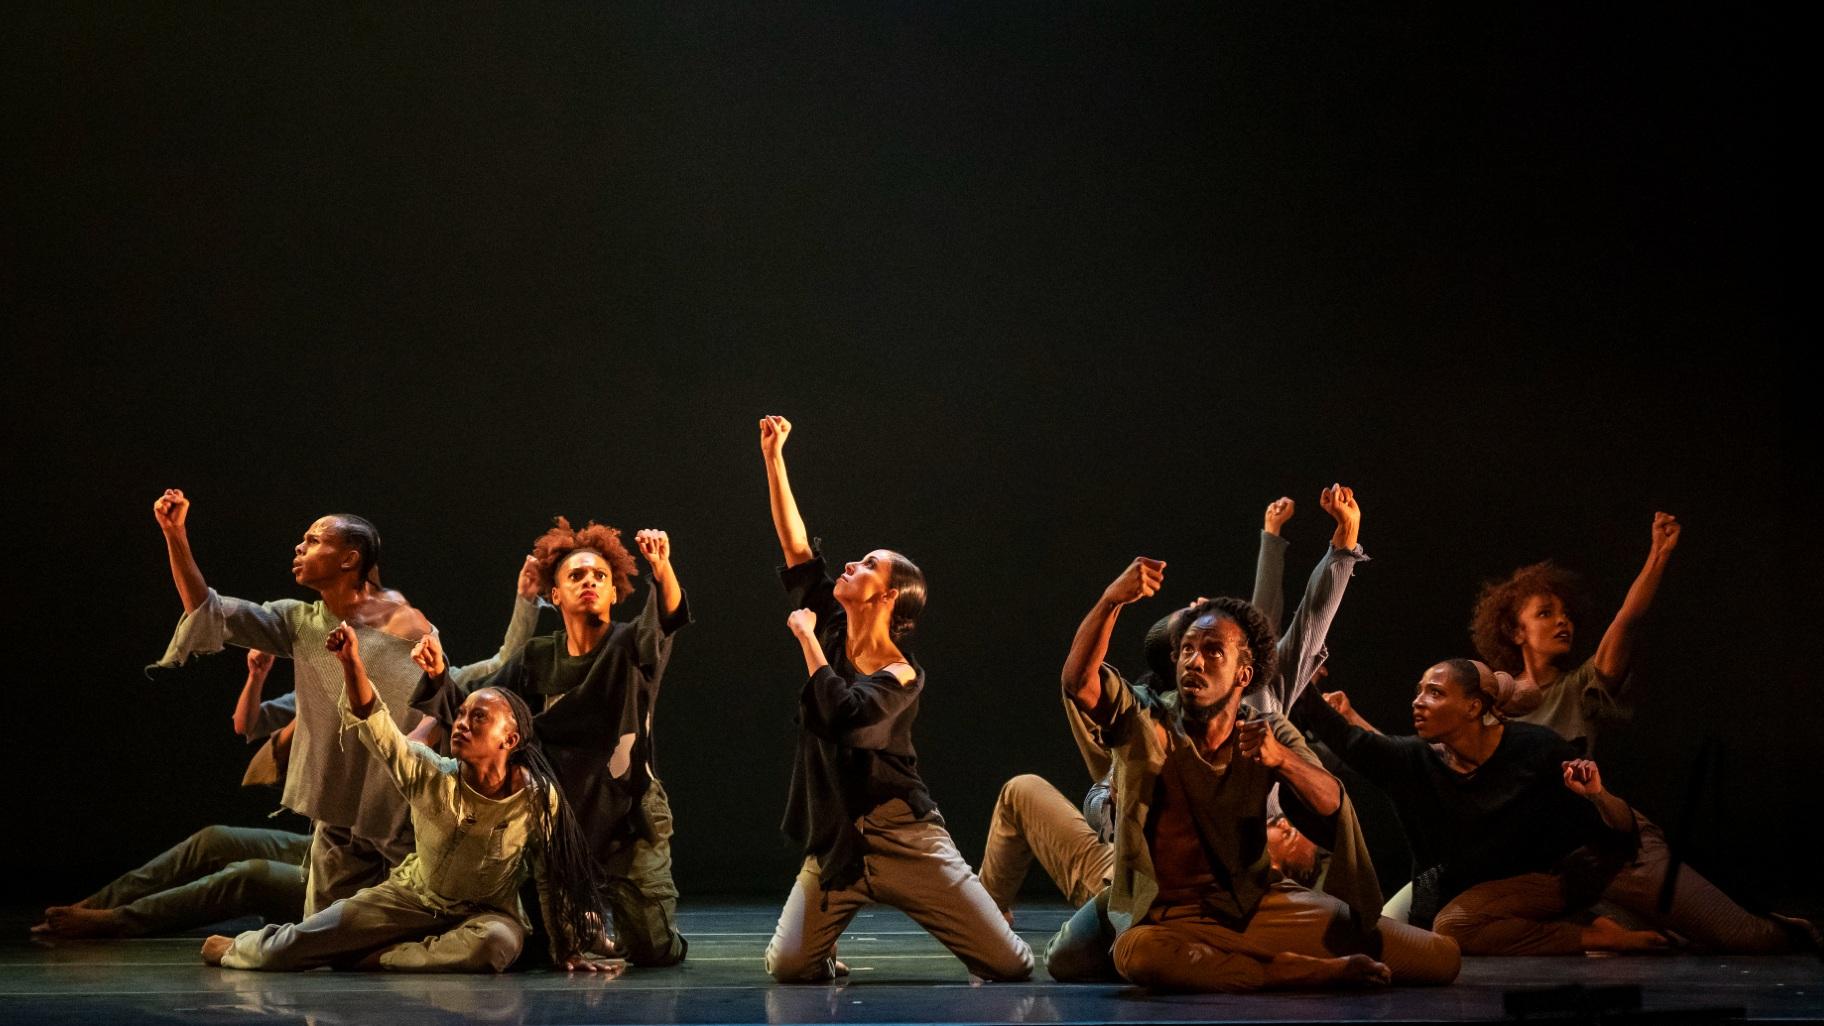 “Madonna Anno Domini” performed by Deeply Rooted Dance Theater company and company apprentice members. (Todd Rosenberg)